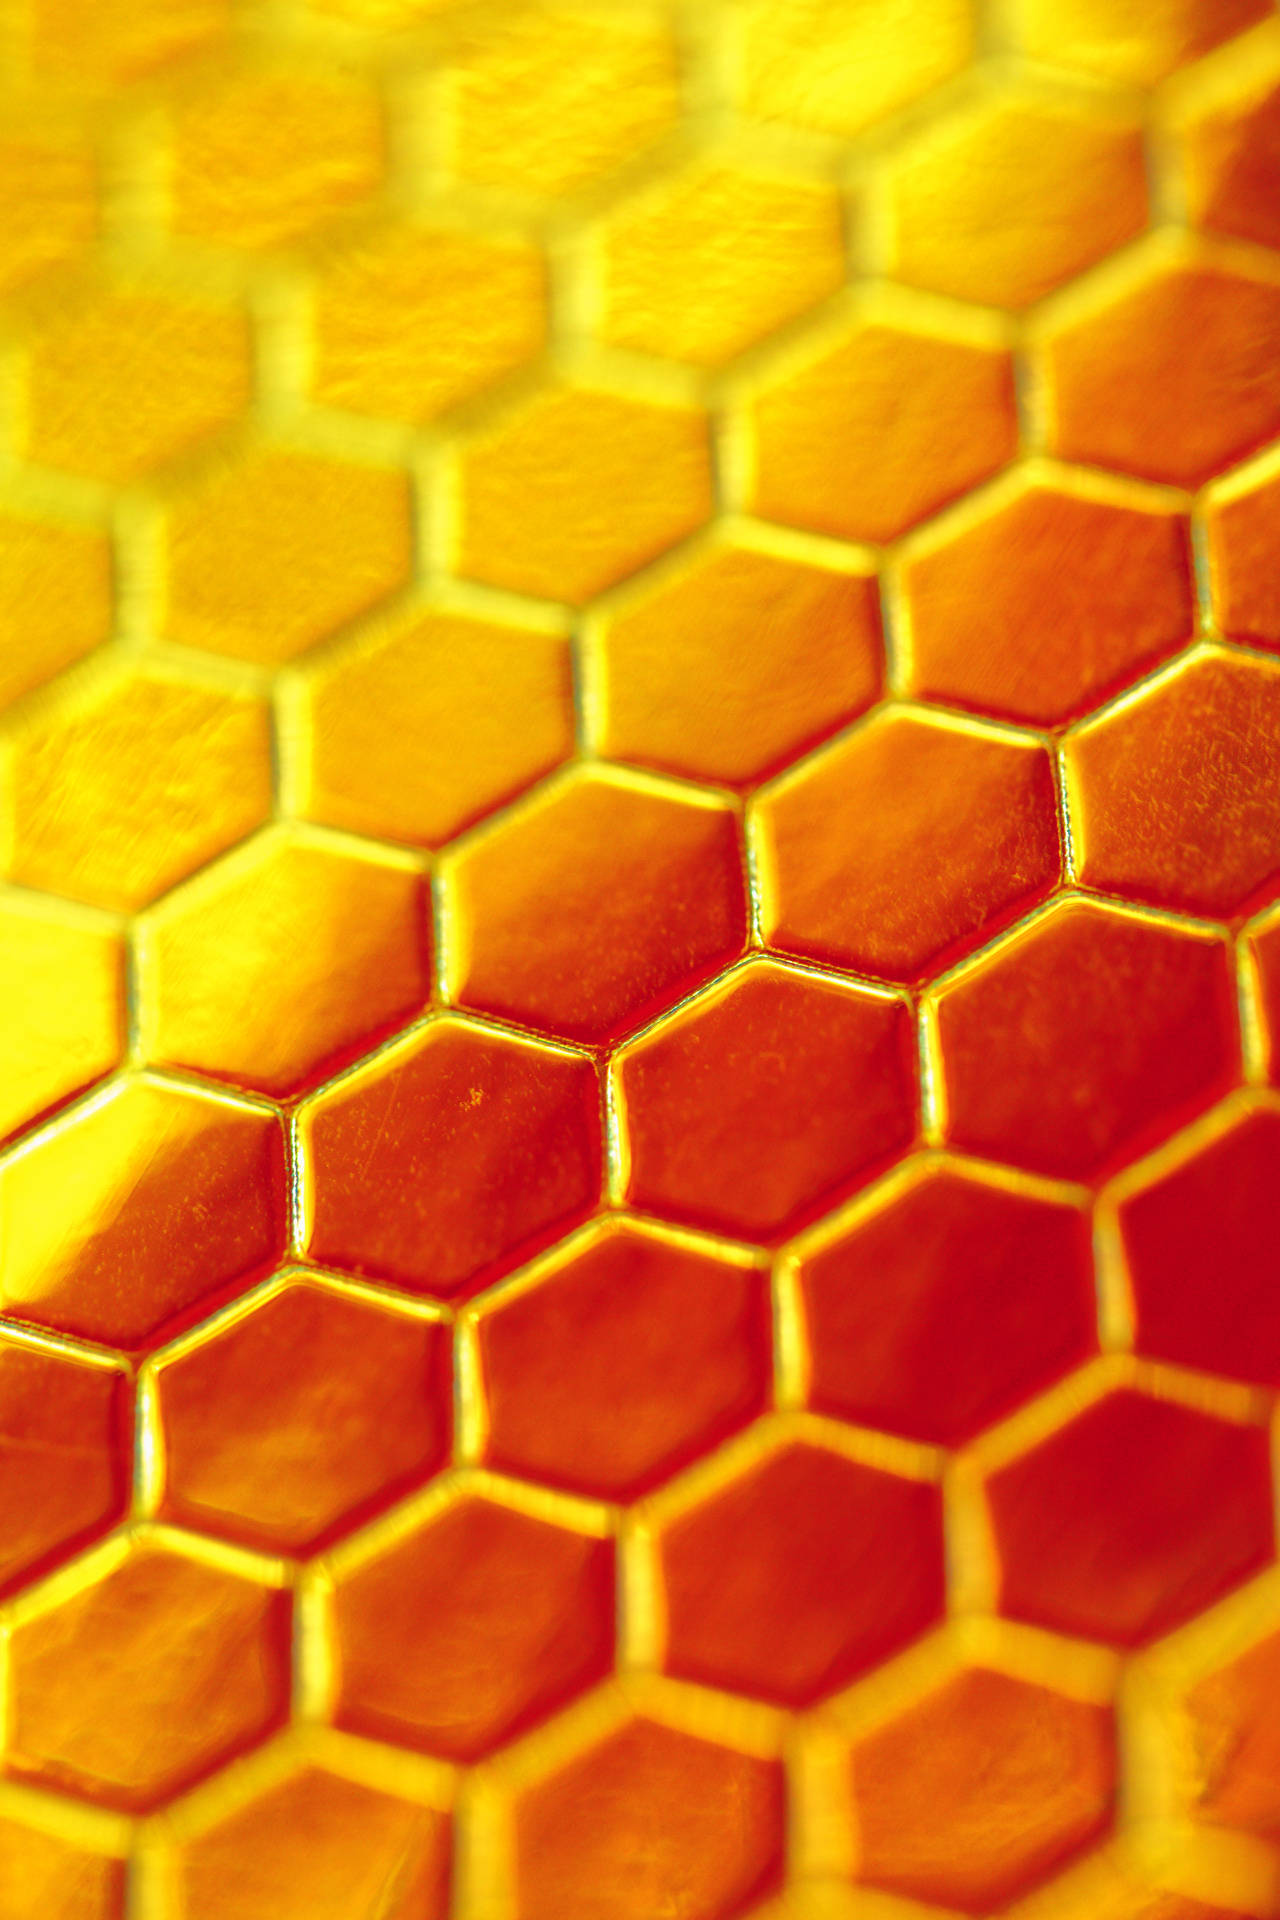 Hexagon 3744X5616 Wallpaper and Background Image